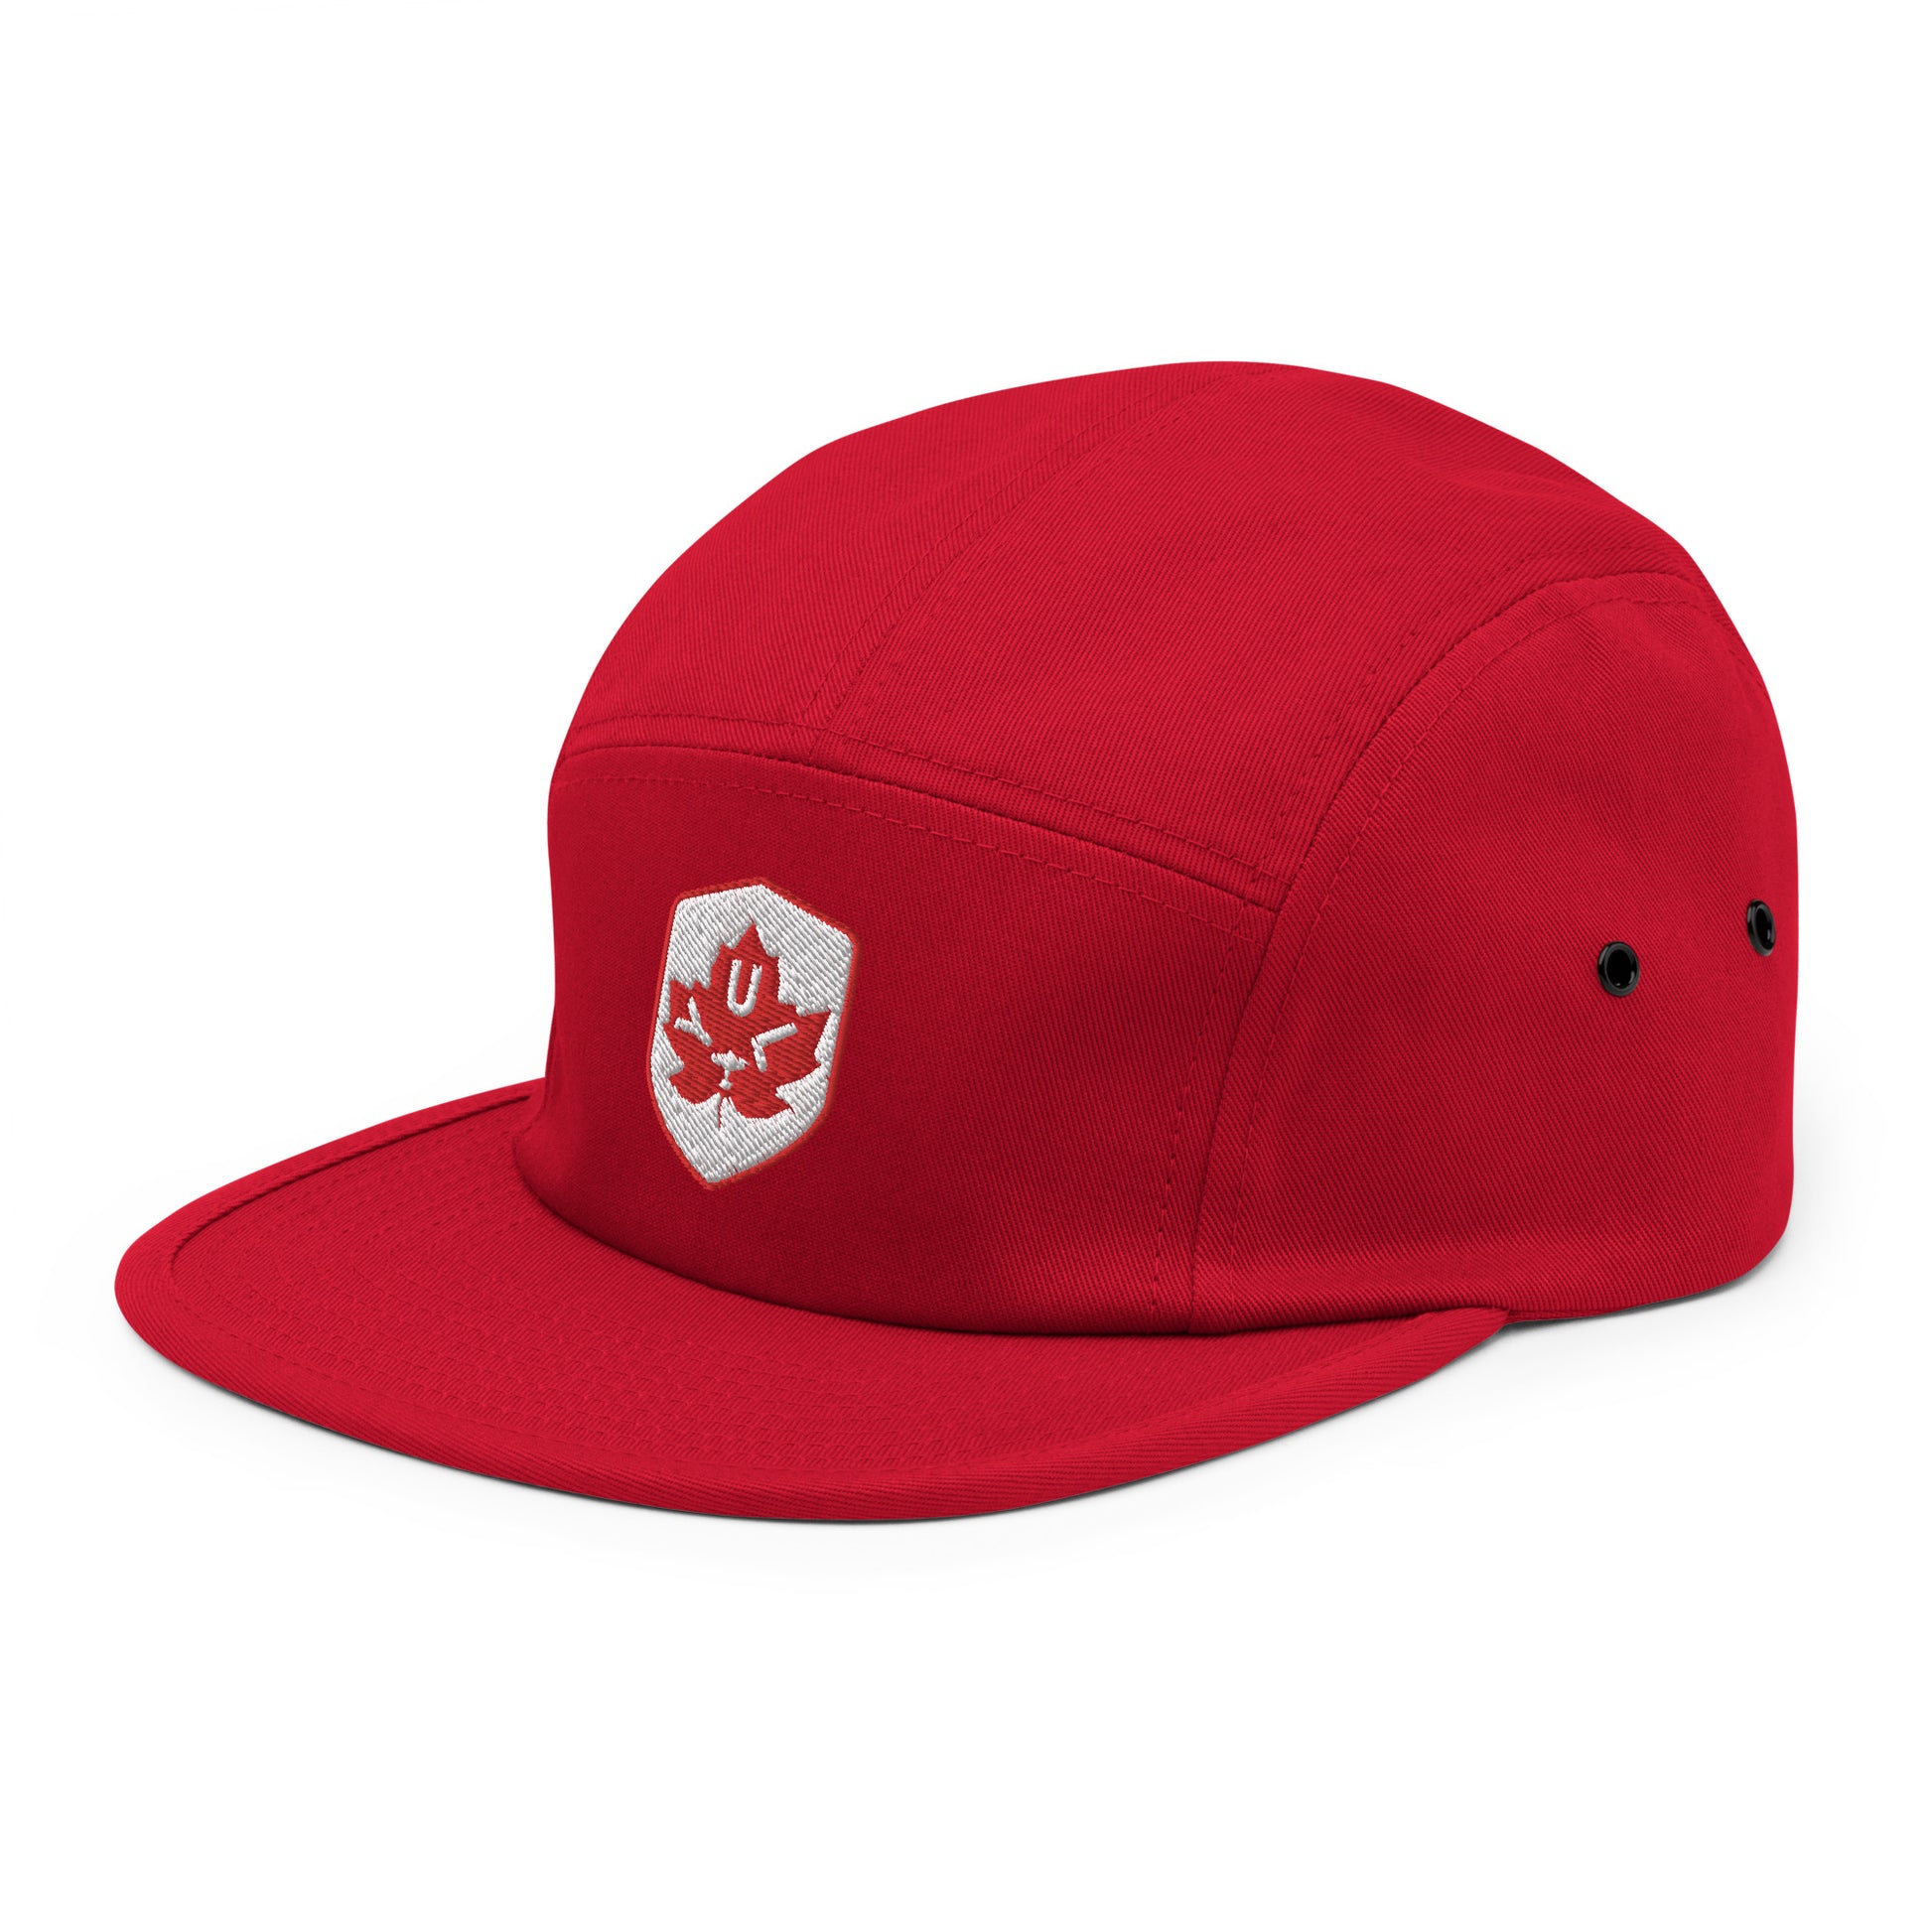 Maple Leaf Camper Hat - Red/White • YUL Montreal • YHM Designs - Image 11